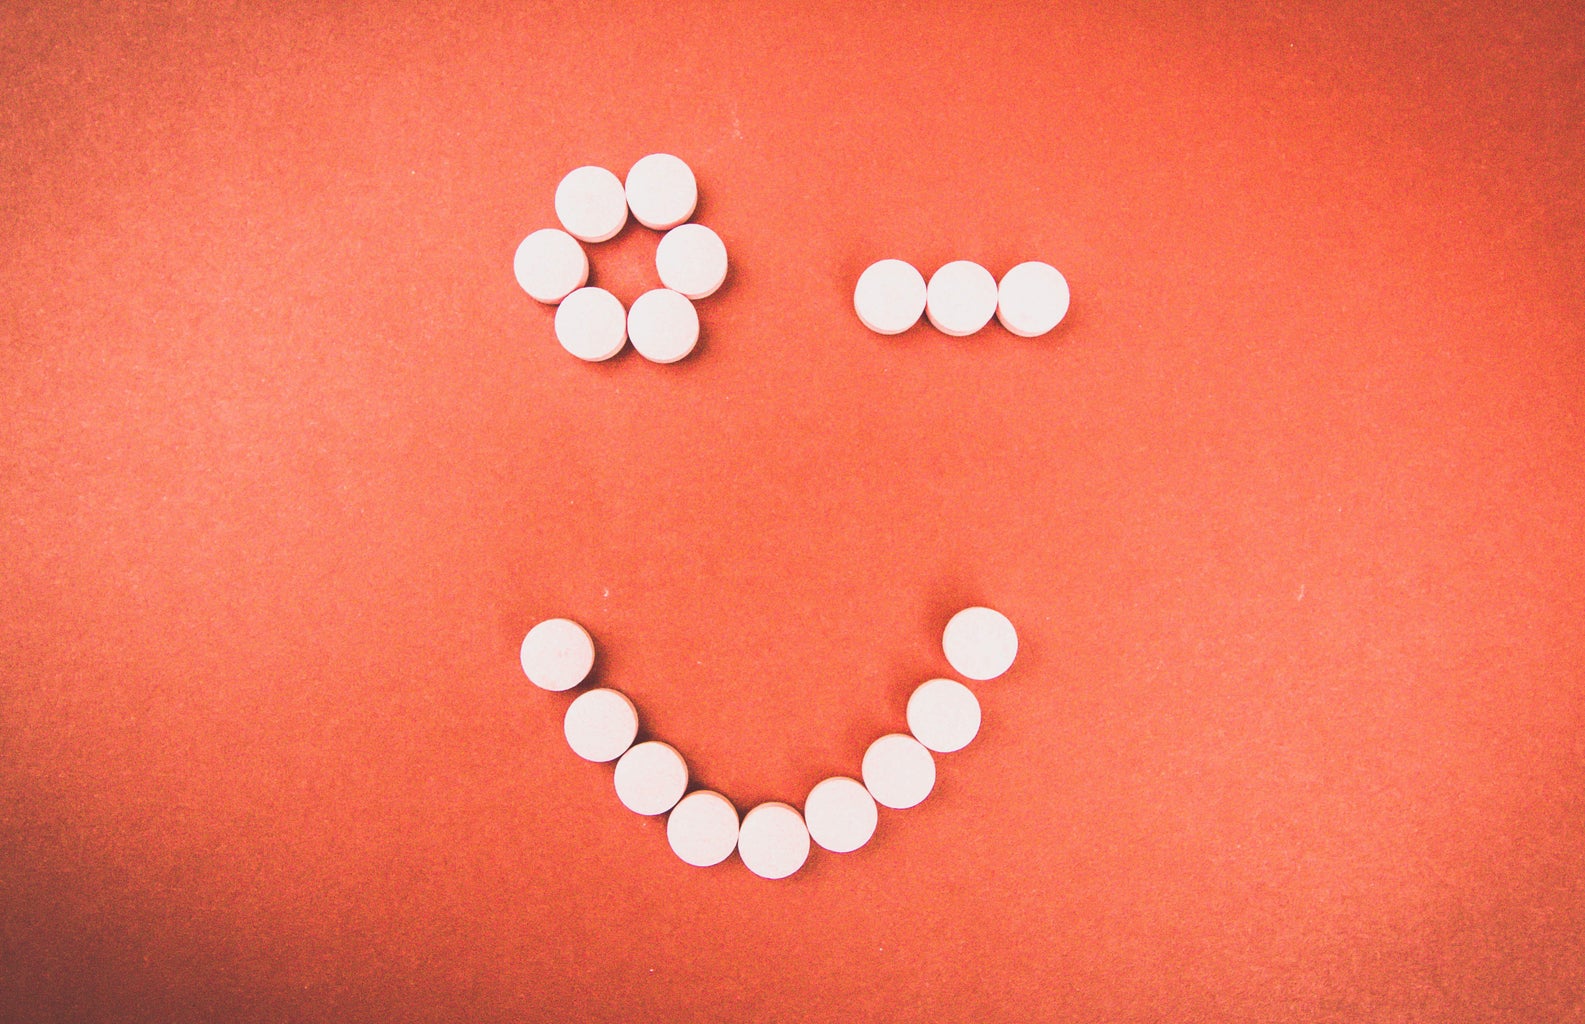 Kristen Bryant-Winky Face With Pills